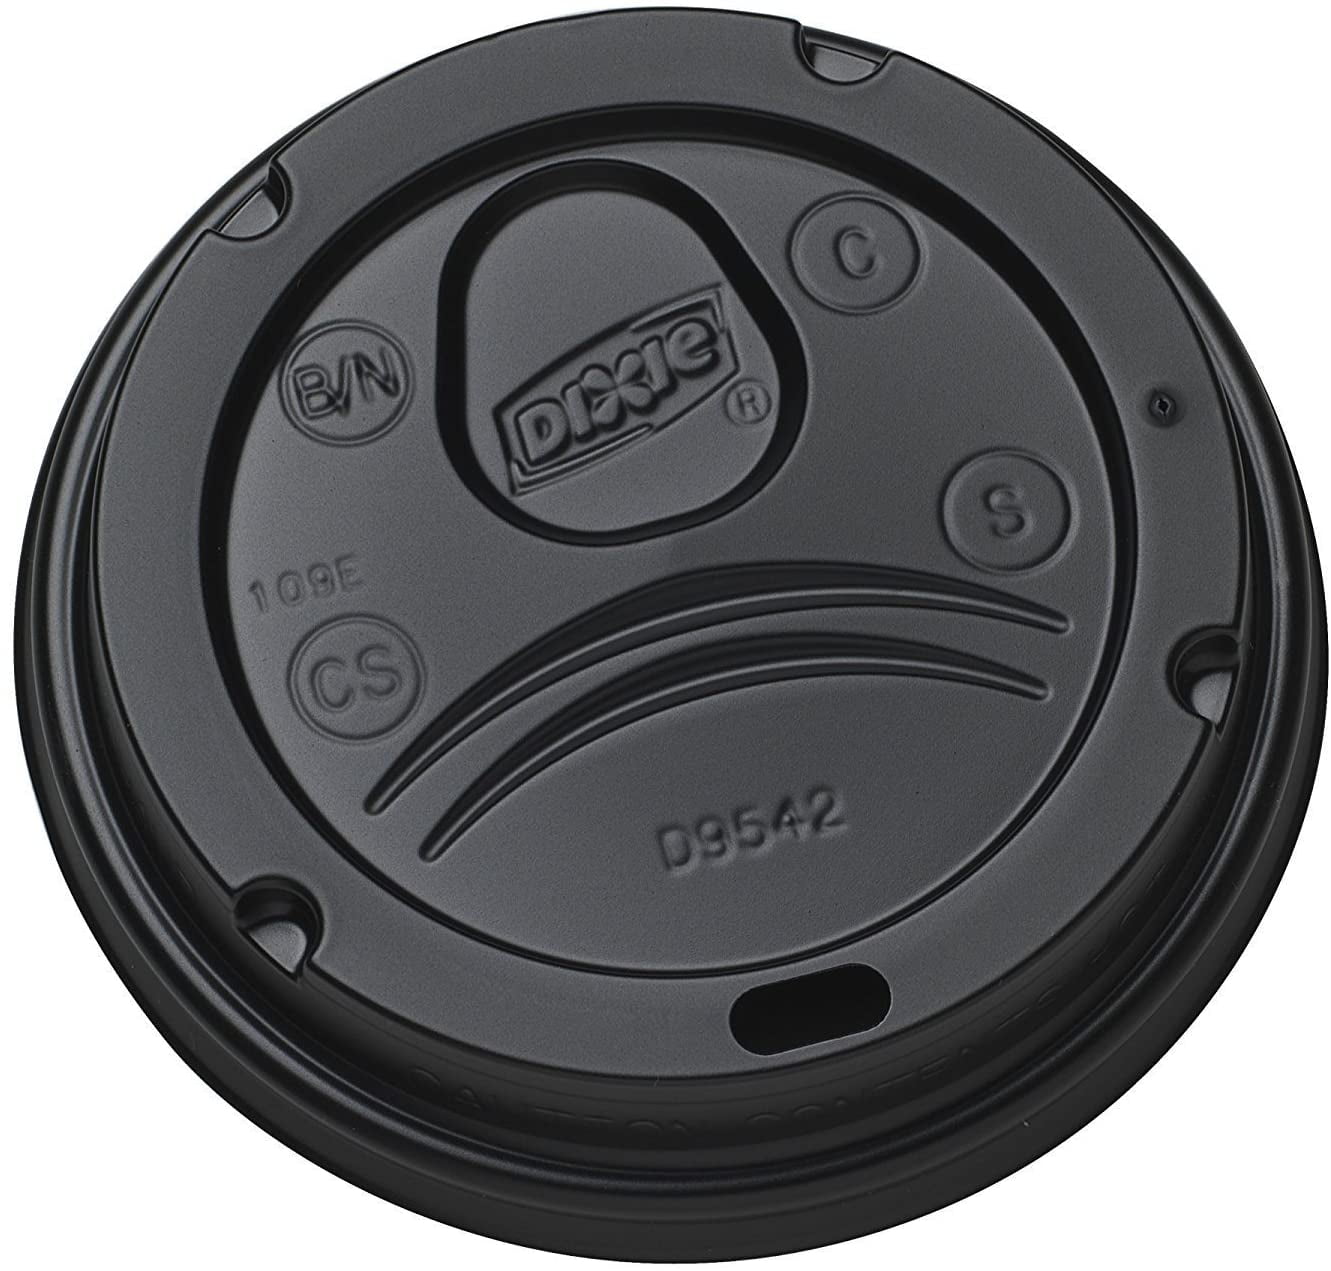 Black Plastic Coffee Cup Lid - Fits 8, 12, 16 and 20 oz, with Red Heart Plug - 500 Count Box